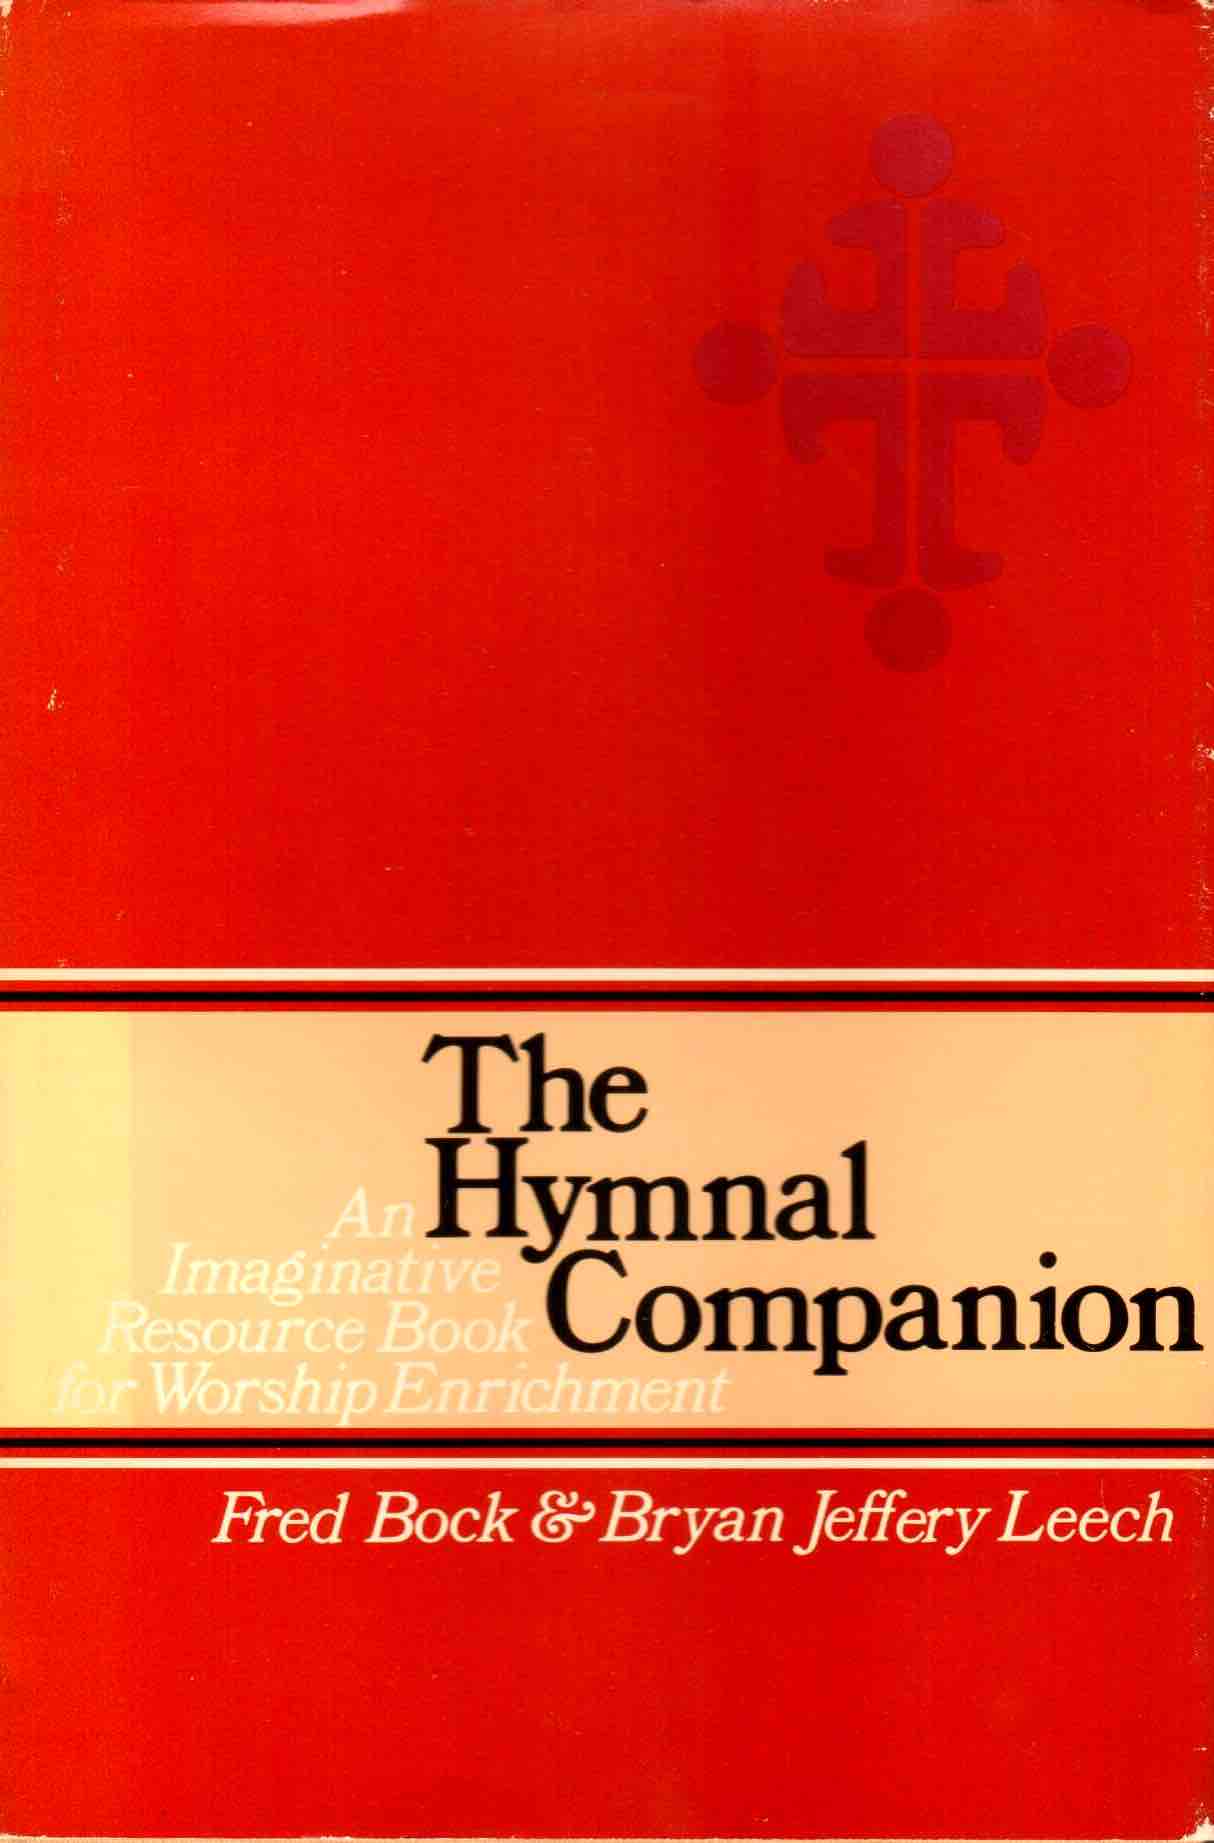 Cover of The Hymnal Companion